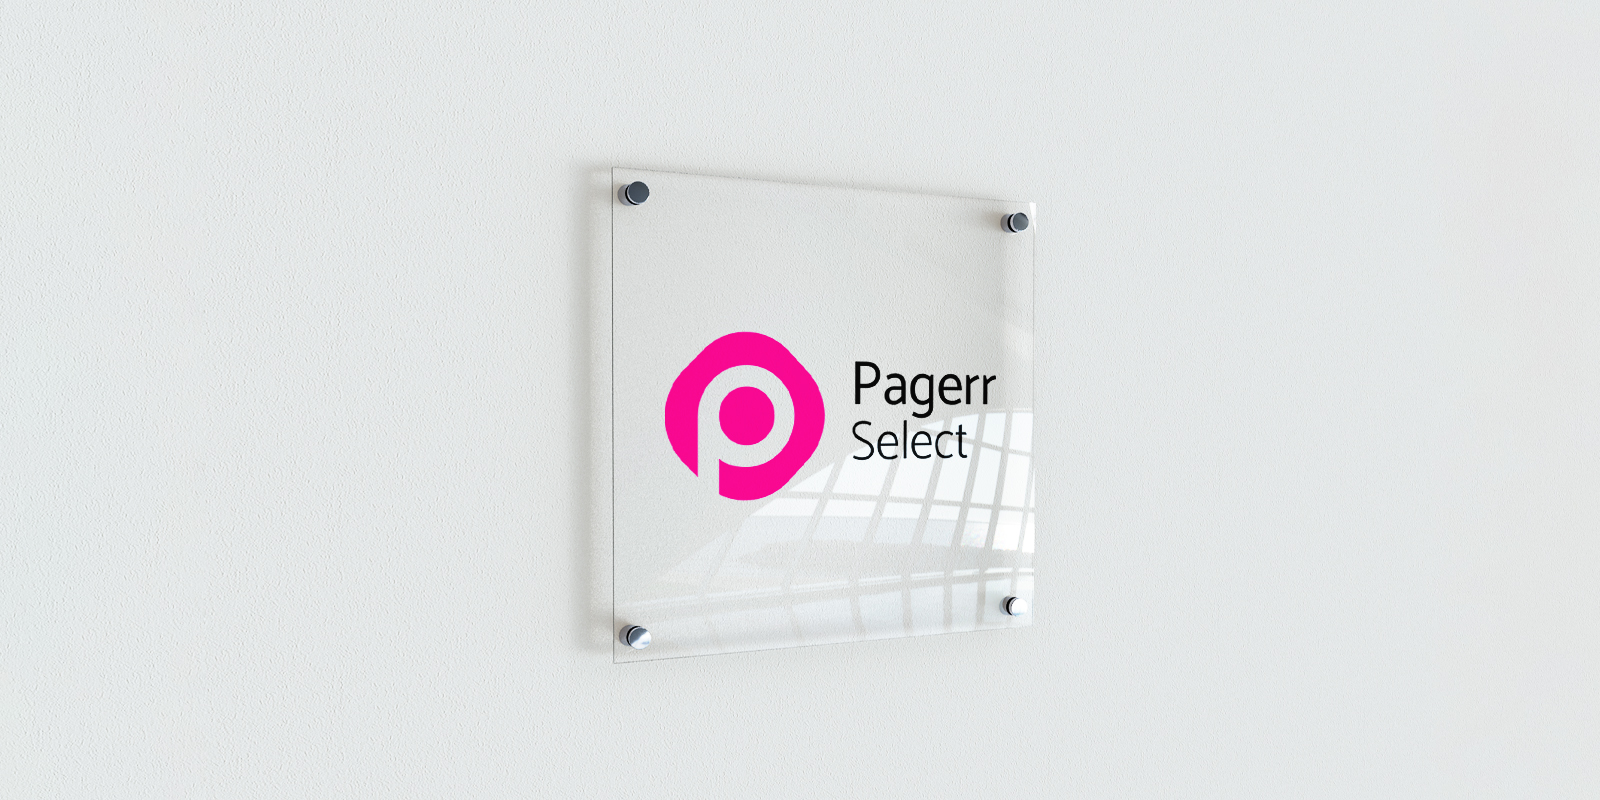 Acrylic signs in Brisbane - Print with Pagerr